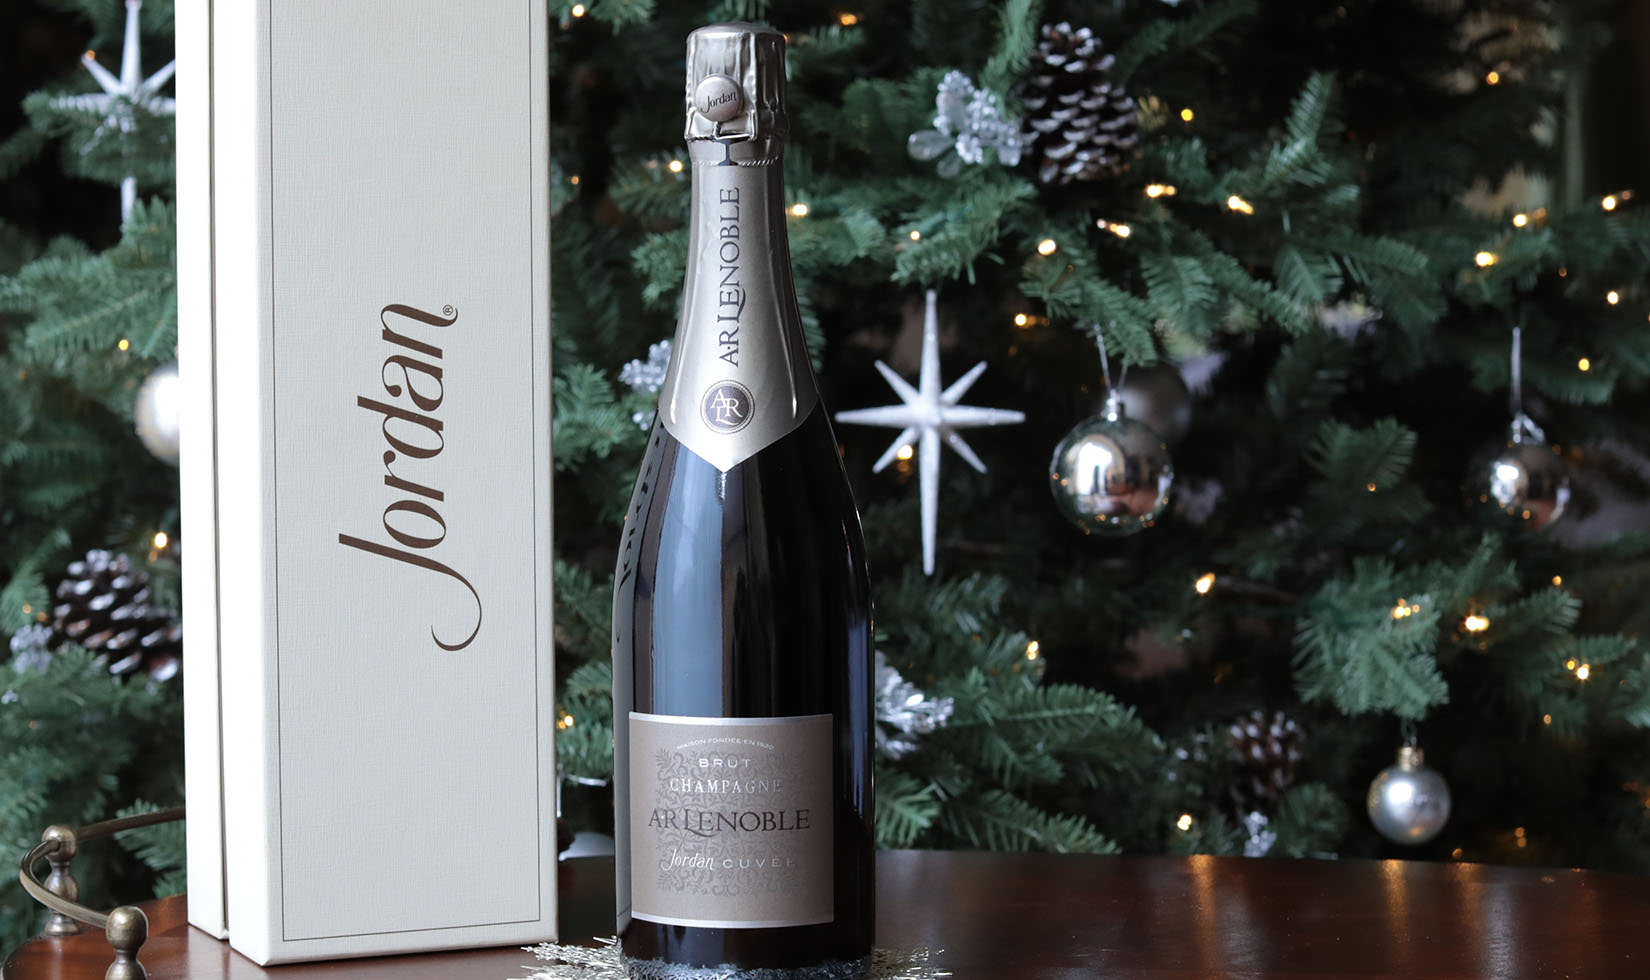 A new gift box to our holiday gifting options that fits our Jordan Cuvée by Champagne AR Lenoble.